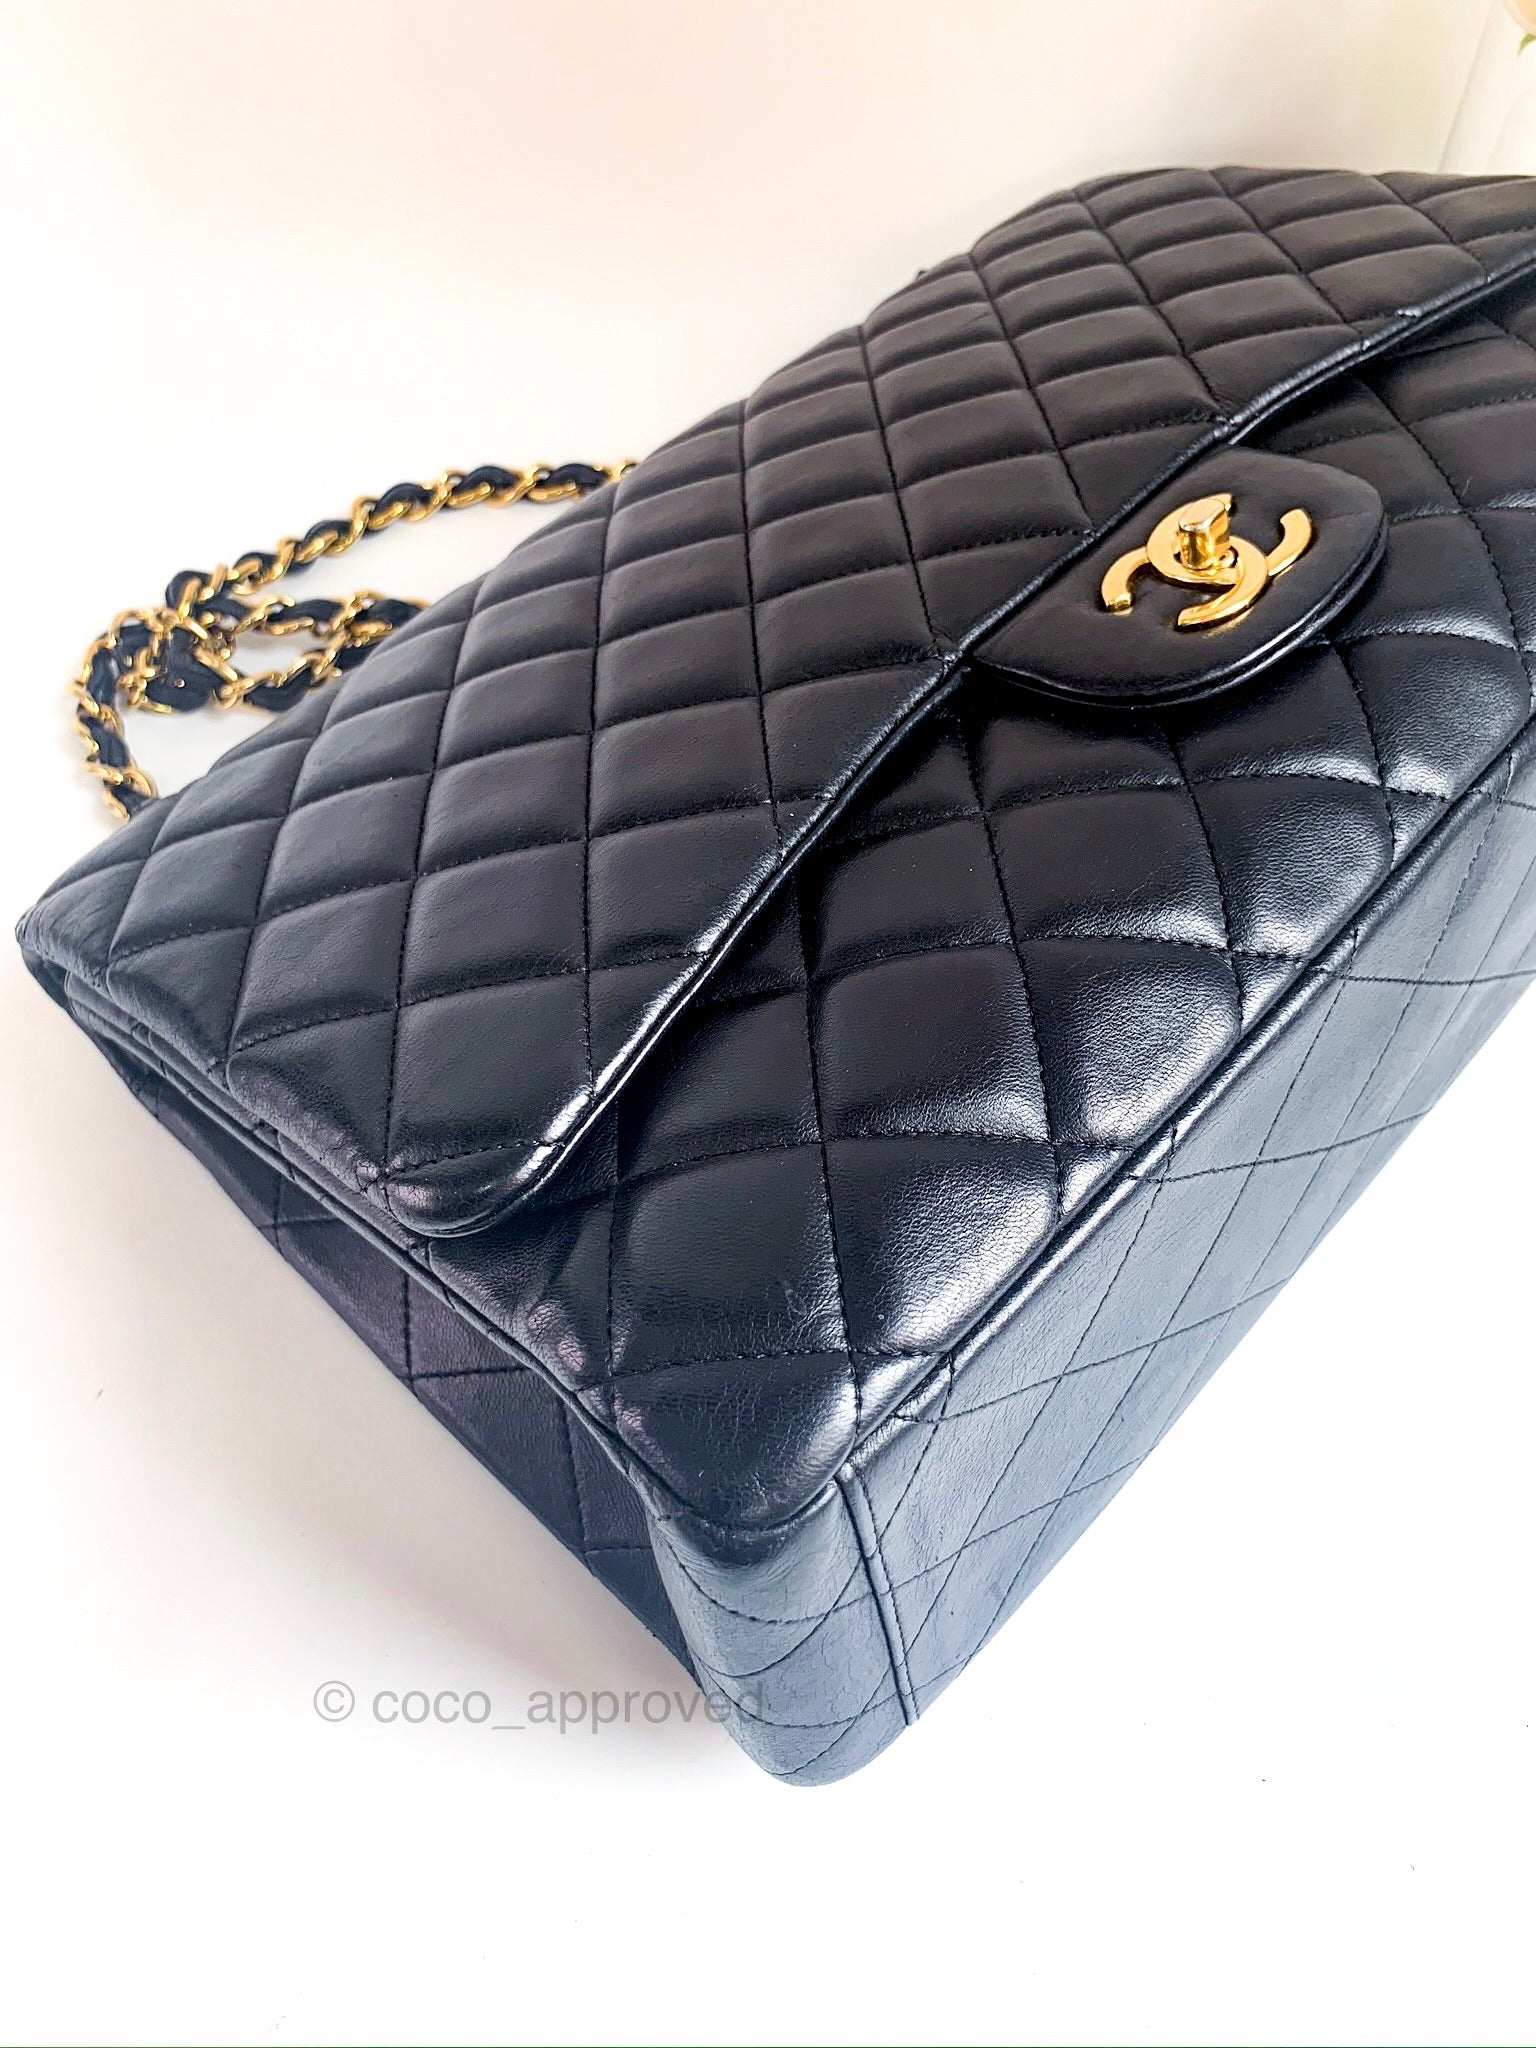 Chanel Pearl Crush Quilted Camera Bag Black Lambskin Aged Gold